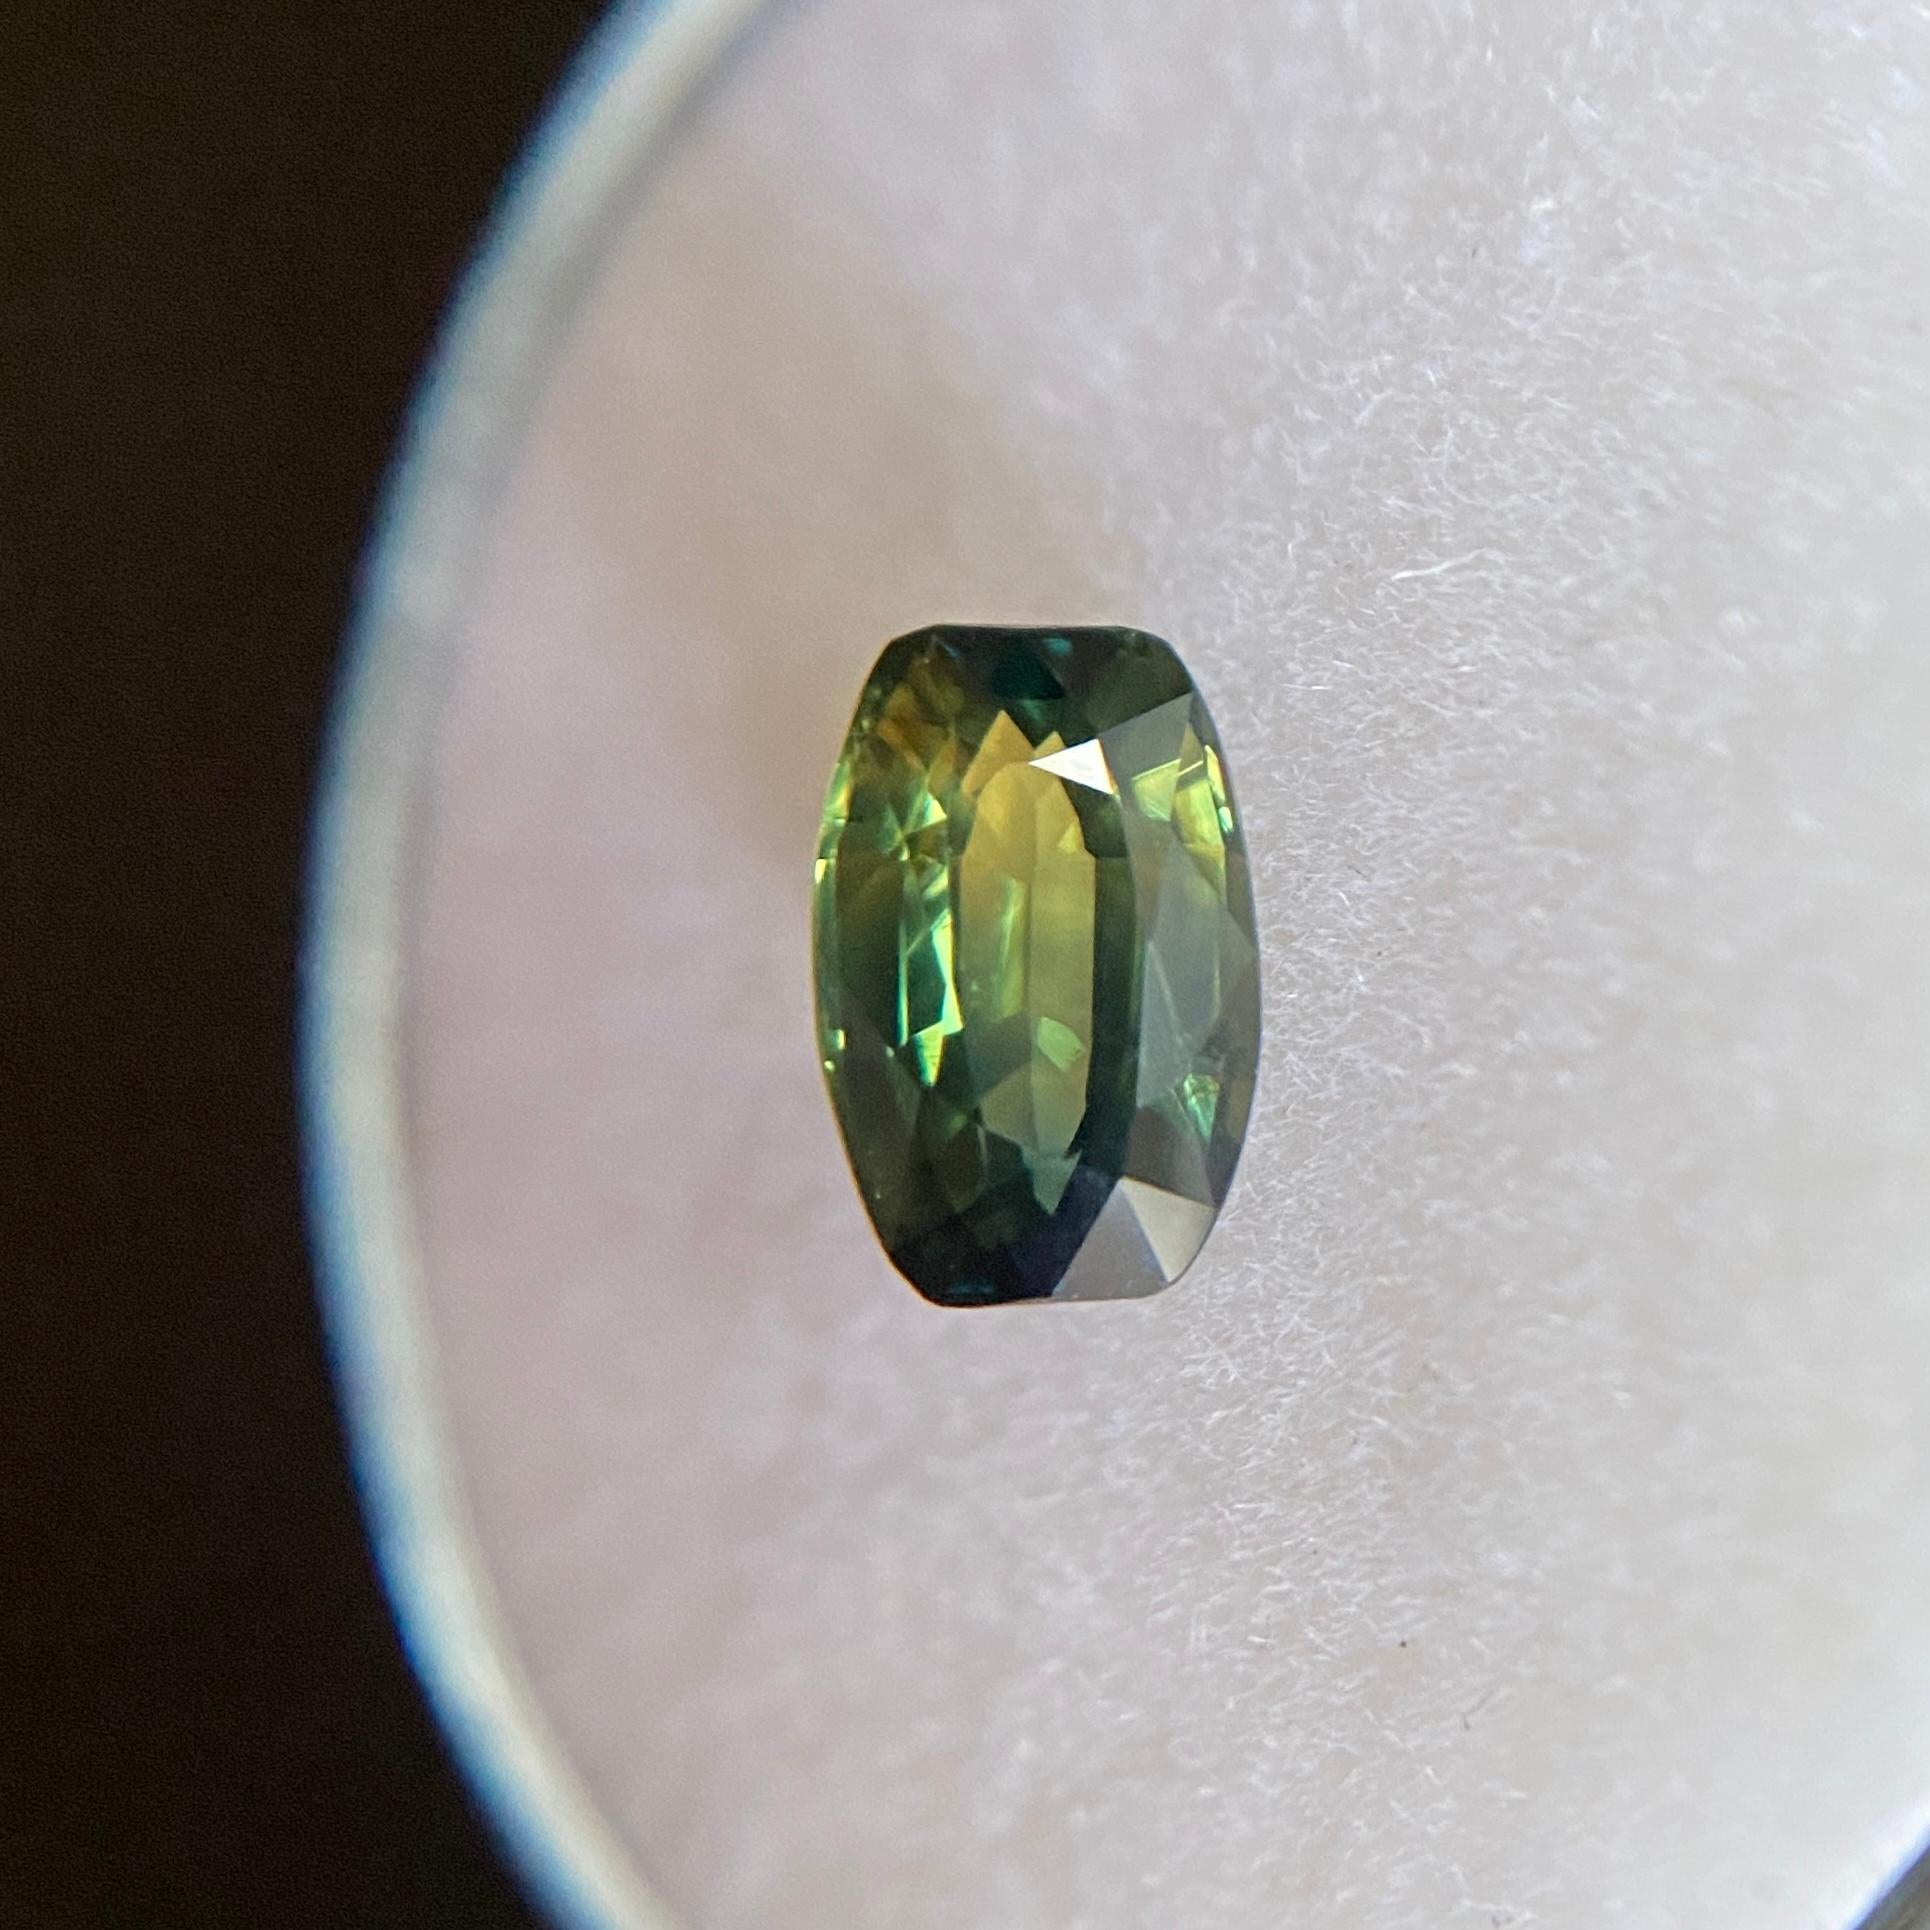 Rare Untreated Australian Parti Colour Sapphire Gemstone.

1.12 Carat unheated sapphire with a rare parti colour effect. Showing blue and yellow green colours with a unique colour split. Very rare and stunning to see.

Fully certified by GIA